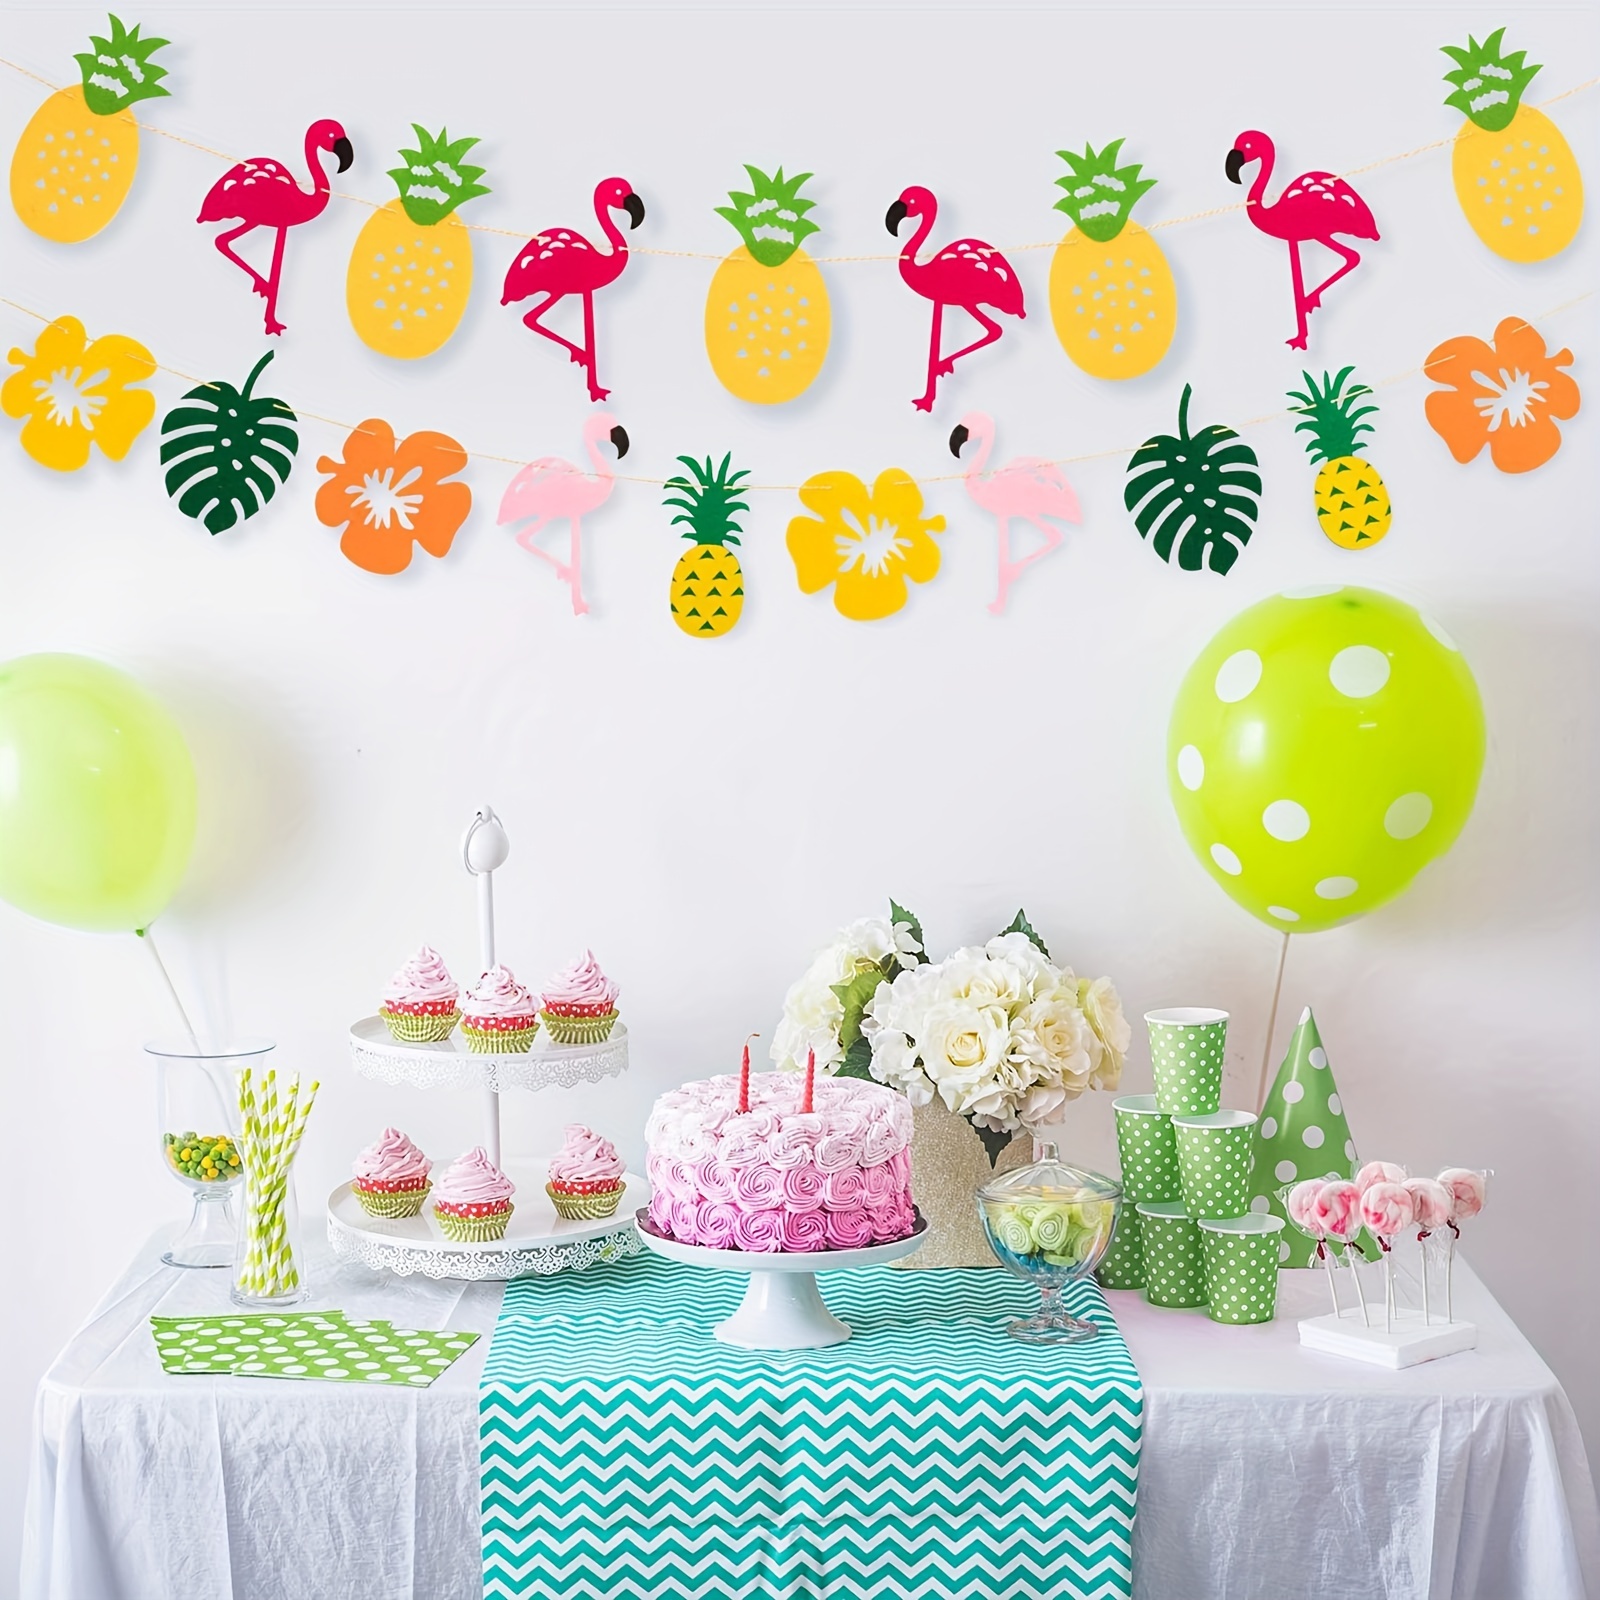  Beach Party Decorations, Beach Theme Party Supplies Includes  Tablecloth Beach Foil Balloons Beach Balls Paper Lanterns Happy Birthday  Party Banners Cake Toppers for Summer Pool Party Decorations : Toys & Games